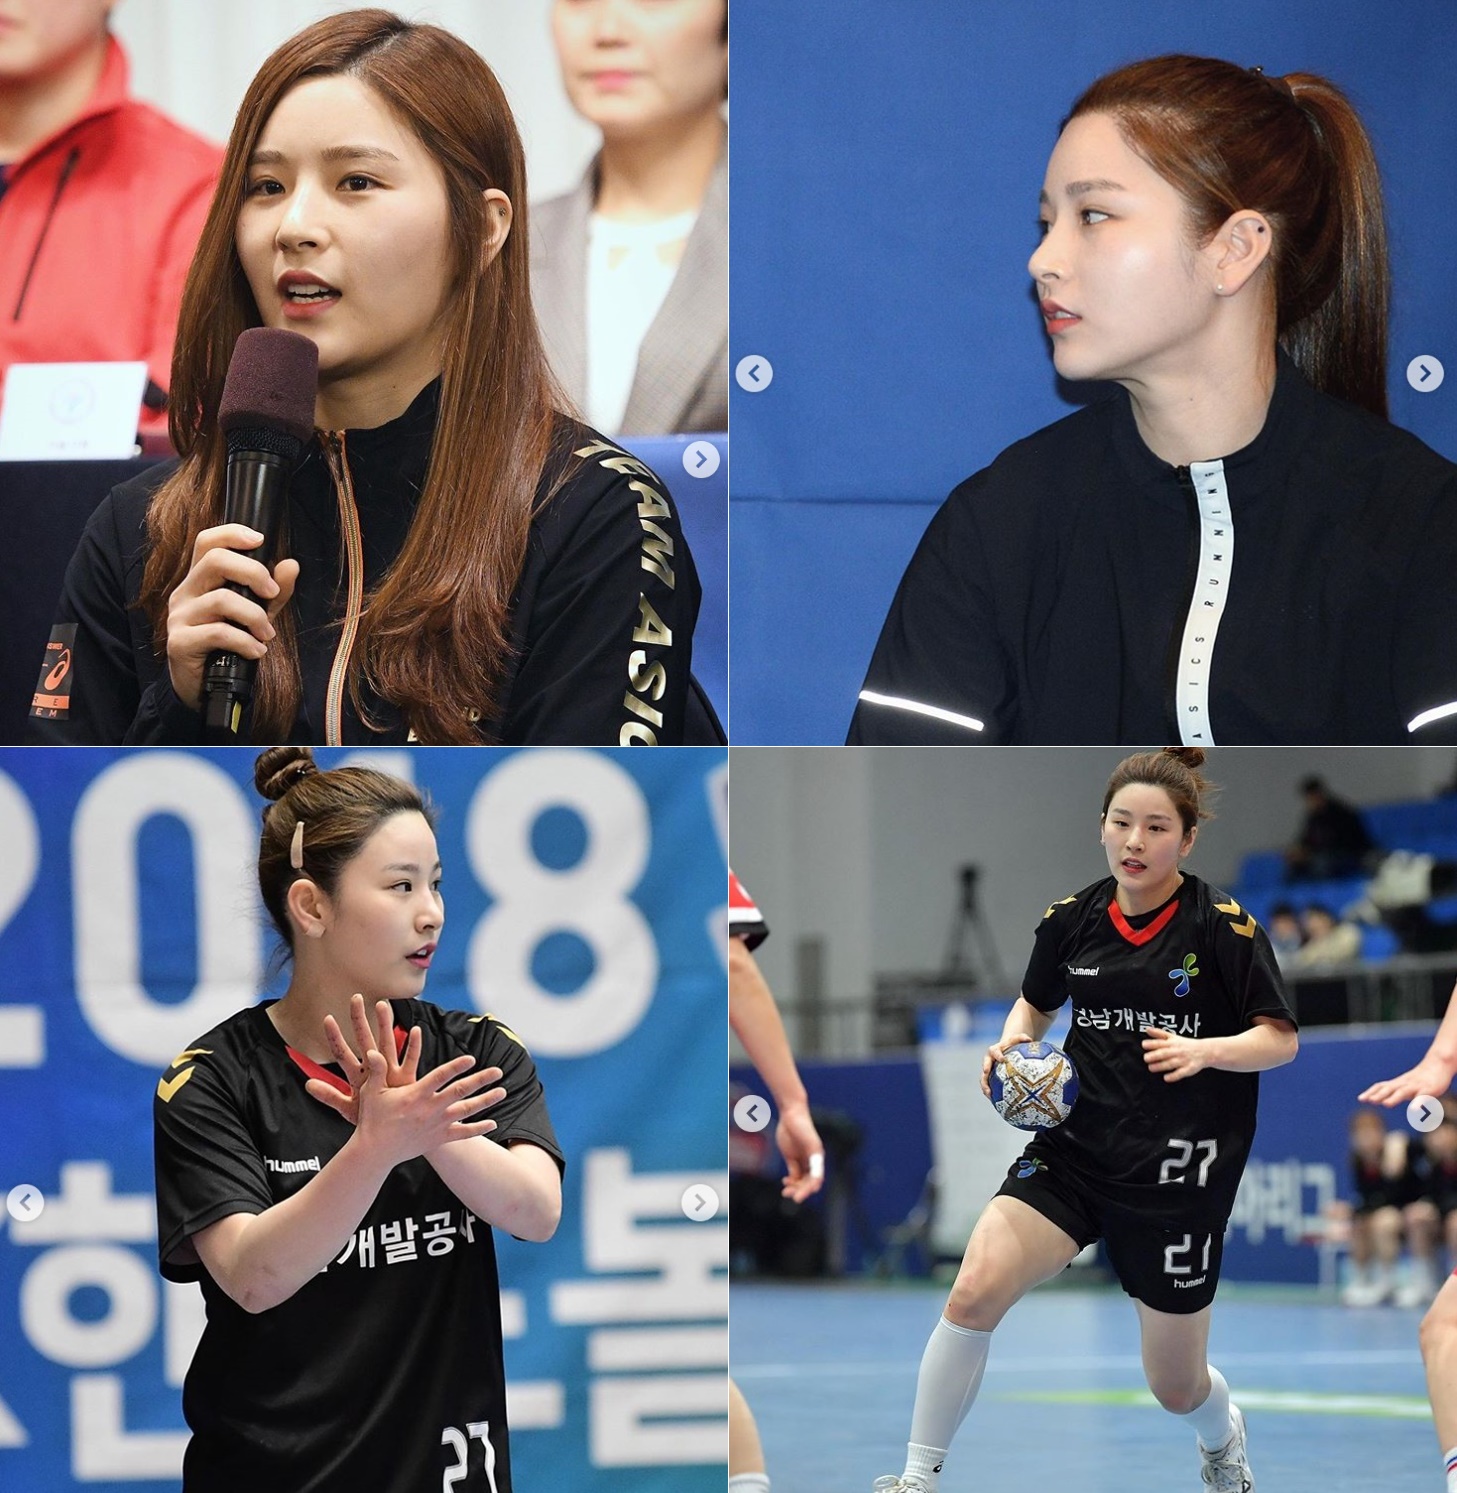 Handball player Park Ha-yan is under the spotlight as actor Shin Se-kyung Similiar Beautiful looks.In JTBC3s Bangguseok Interview, which aired on the 25th, Park Ha-yans interview was released. Park Ha-yan is currently in charge of center back at Yangsan Development Corporation.Park Ha-yan said, I was a track and field athlete in my fourth grade in elementary school, but coach Handball was an acquaintance of a physical education teacher at the time. I liked to run and liked exercise, so I liked it.She passed the entrance test at once and became a Handball player.Park said, I did not even know what Handball was at first, he said. I followed it so I learned what Handball was and it was fun to try.After the broadcast, Park Ha-yan was attracted to the players.On the 26th, HandballTV official Instagram posted several photos of Park Hae-yan with the article The # Silmon Fairy # Park Hee-yan player hard hair # Shin Se-kyungSimilar # Two Shots on the 26th.The outstanding beautiful looks caught my eye.Born in 1993, Park Ha-yan joined Yangsan Development Corporation in 2012 and is active.In the second round of the 2019-2020 SKHandball Korea League Womens Division held at Samcheok Gymnasium in Gangwon Province on the 16th, SK led the team to a 36-32 victory with a solid defense in the game.